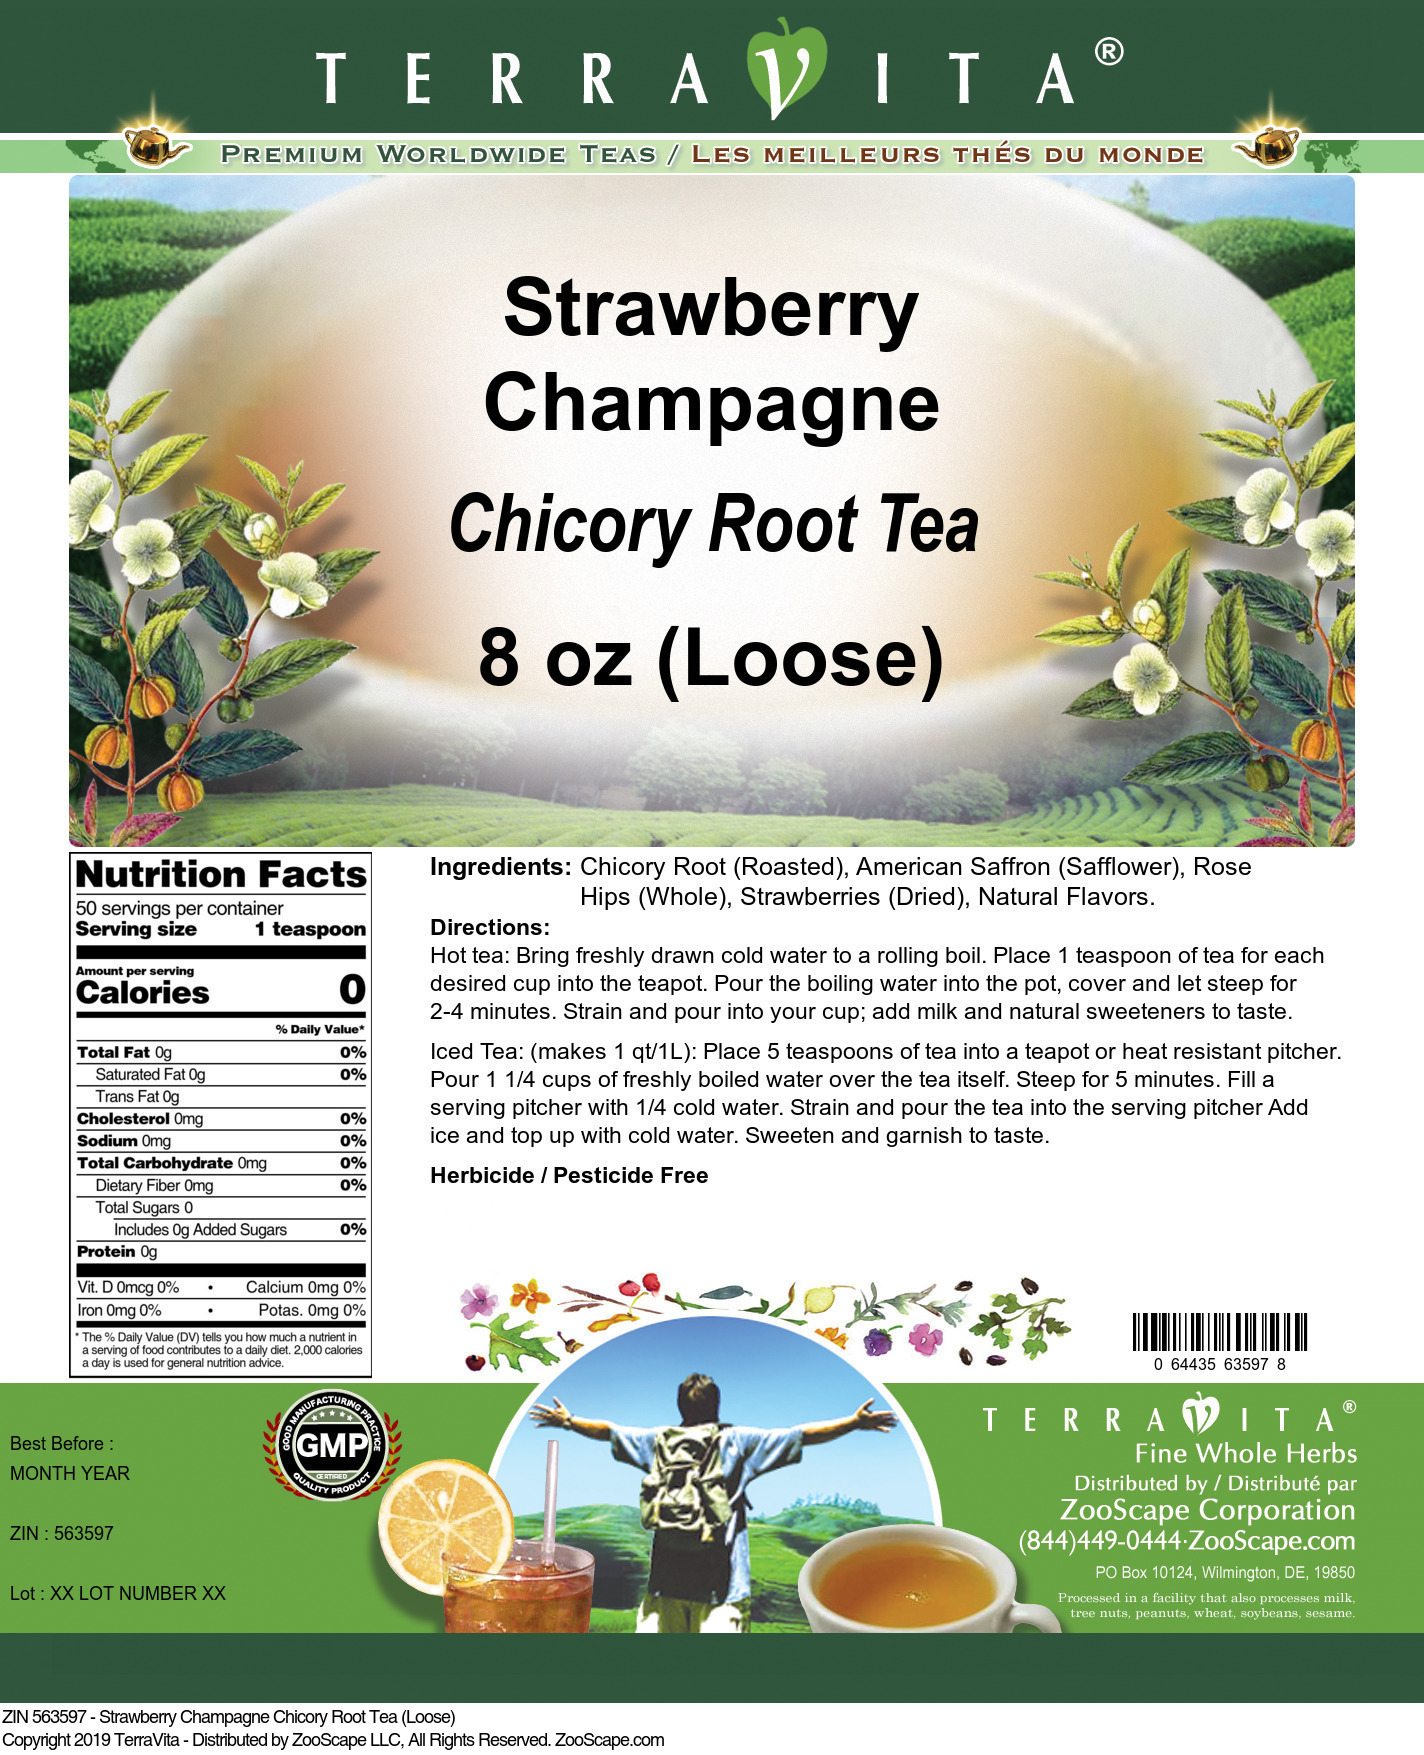 Strawberry Champagne Chicory Root Tea (Loose) - Label